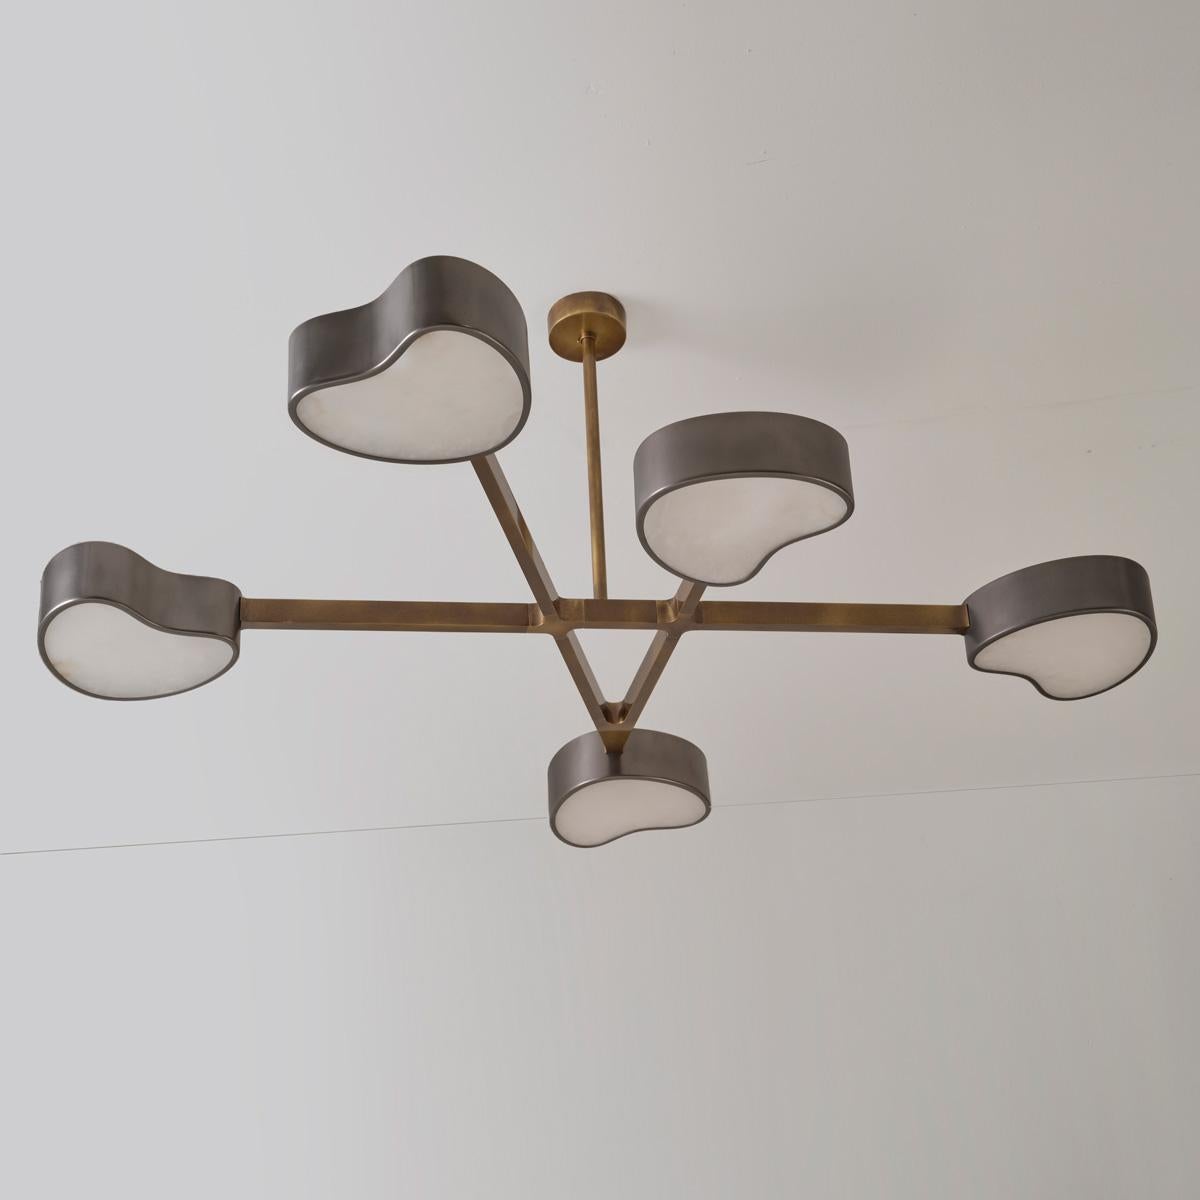 Cuore N.5 Ceiling Light by Gaspare Asaro. Satin Brass and Sand White Finish For Sale 1